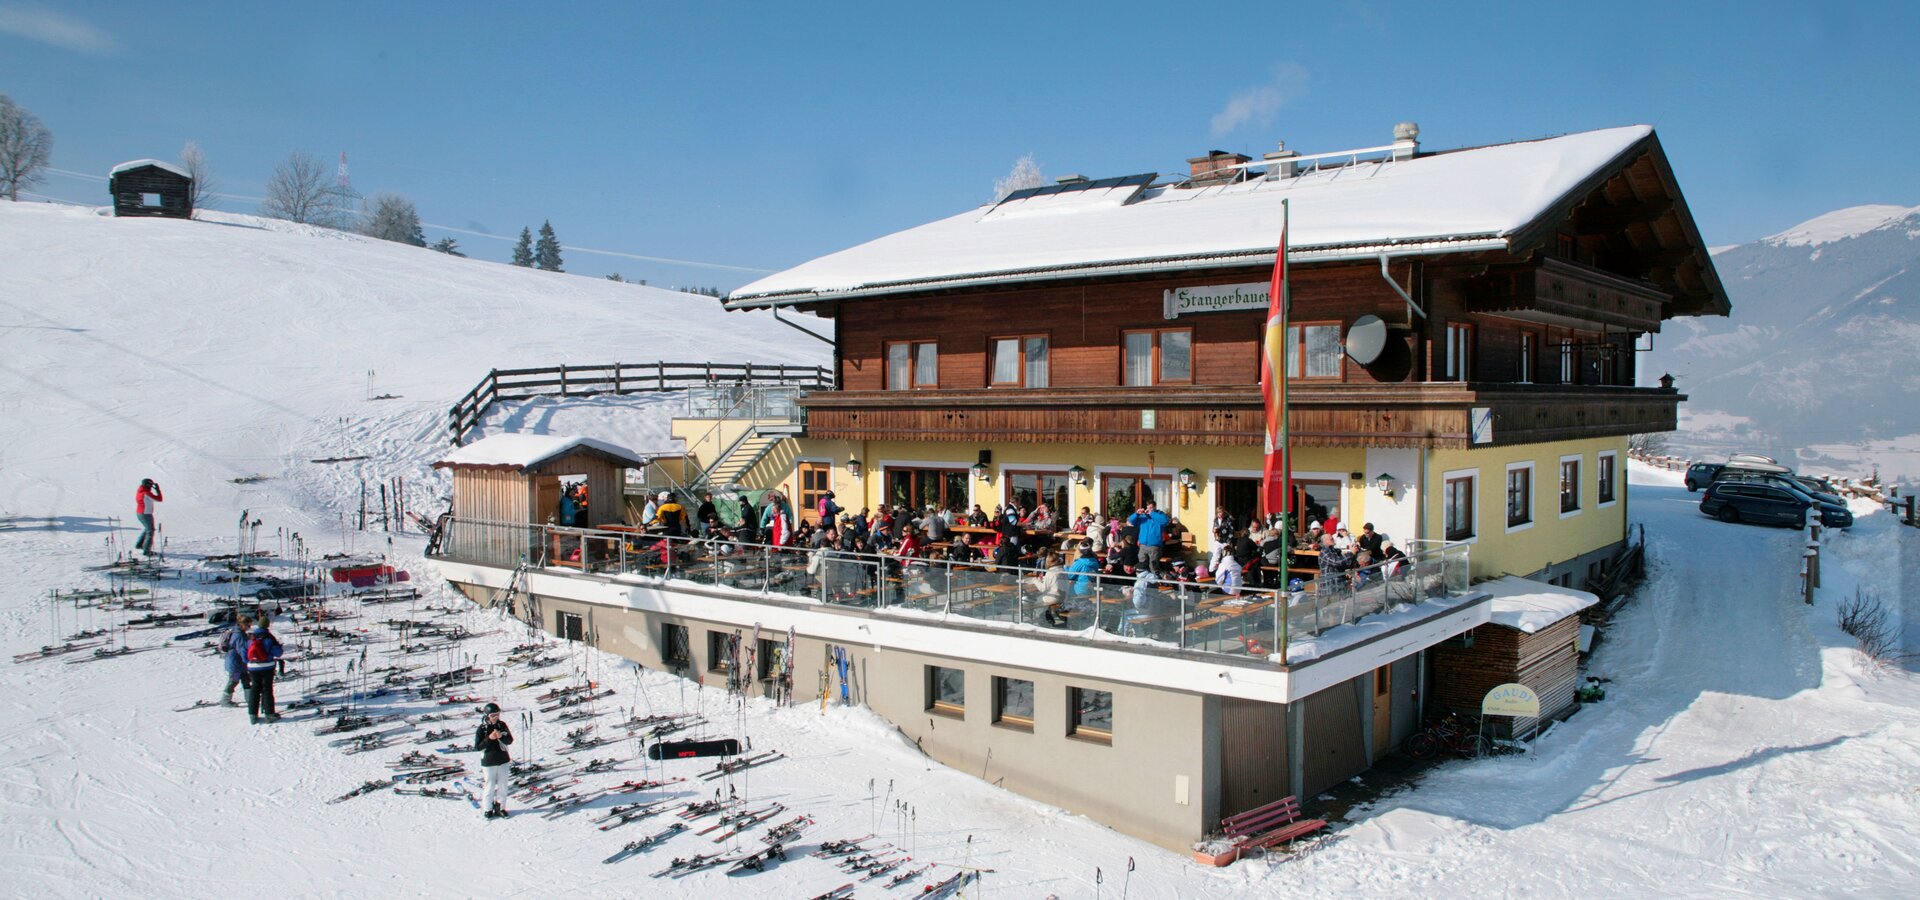 The Jausenstation Stangerbauer is situated in 1.100 m above sea level, below the mid station of the new MK Maiskogelbahn lift | © Kitzsteinhorn